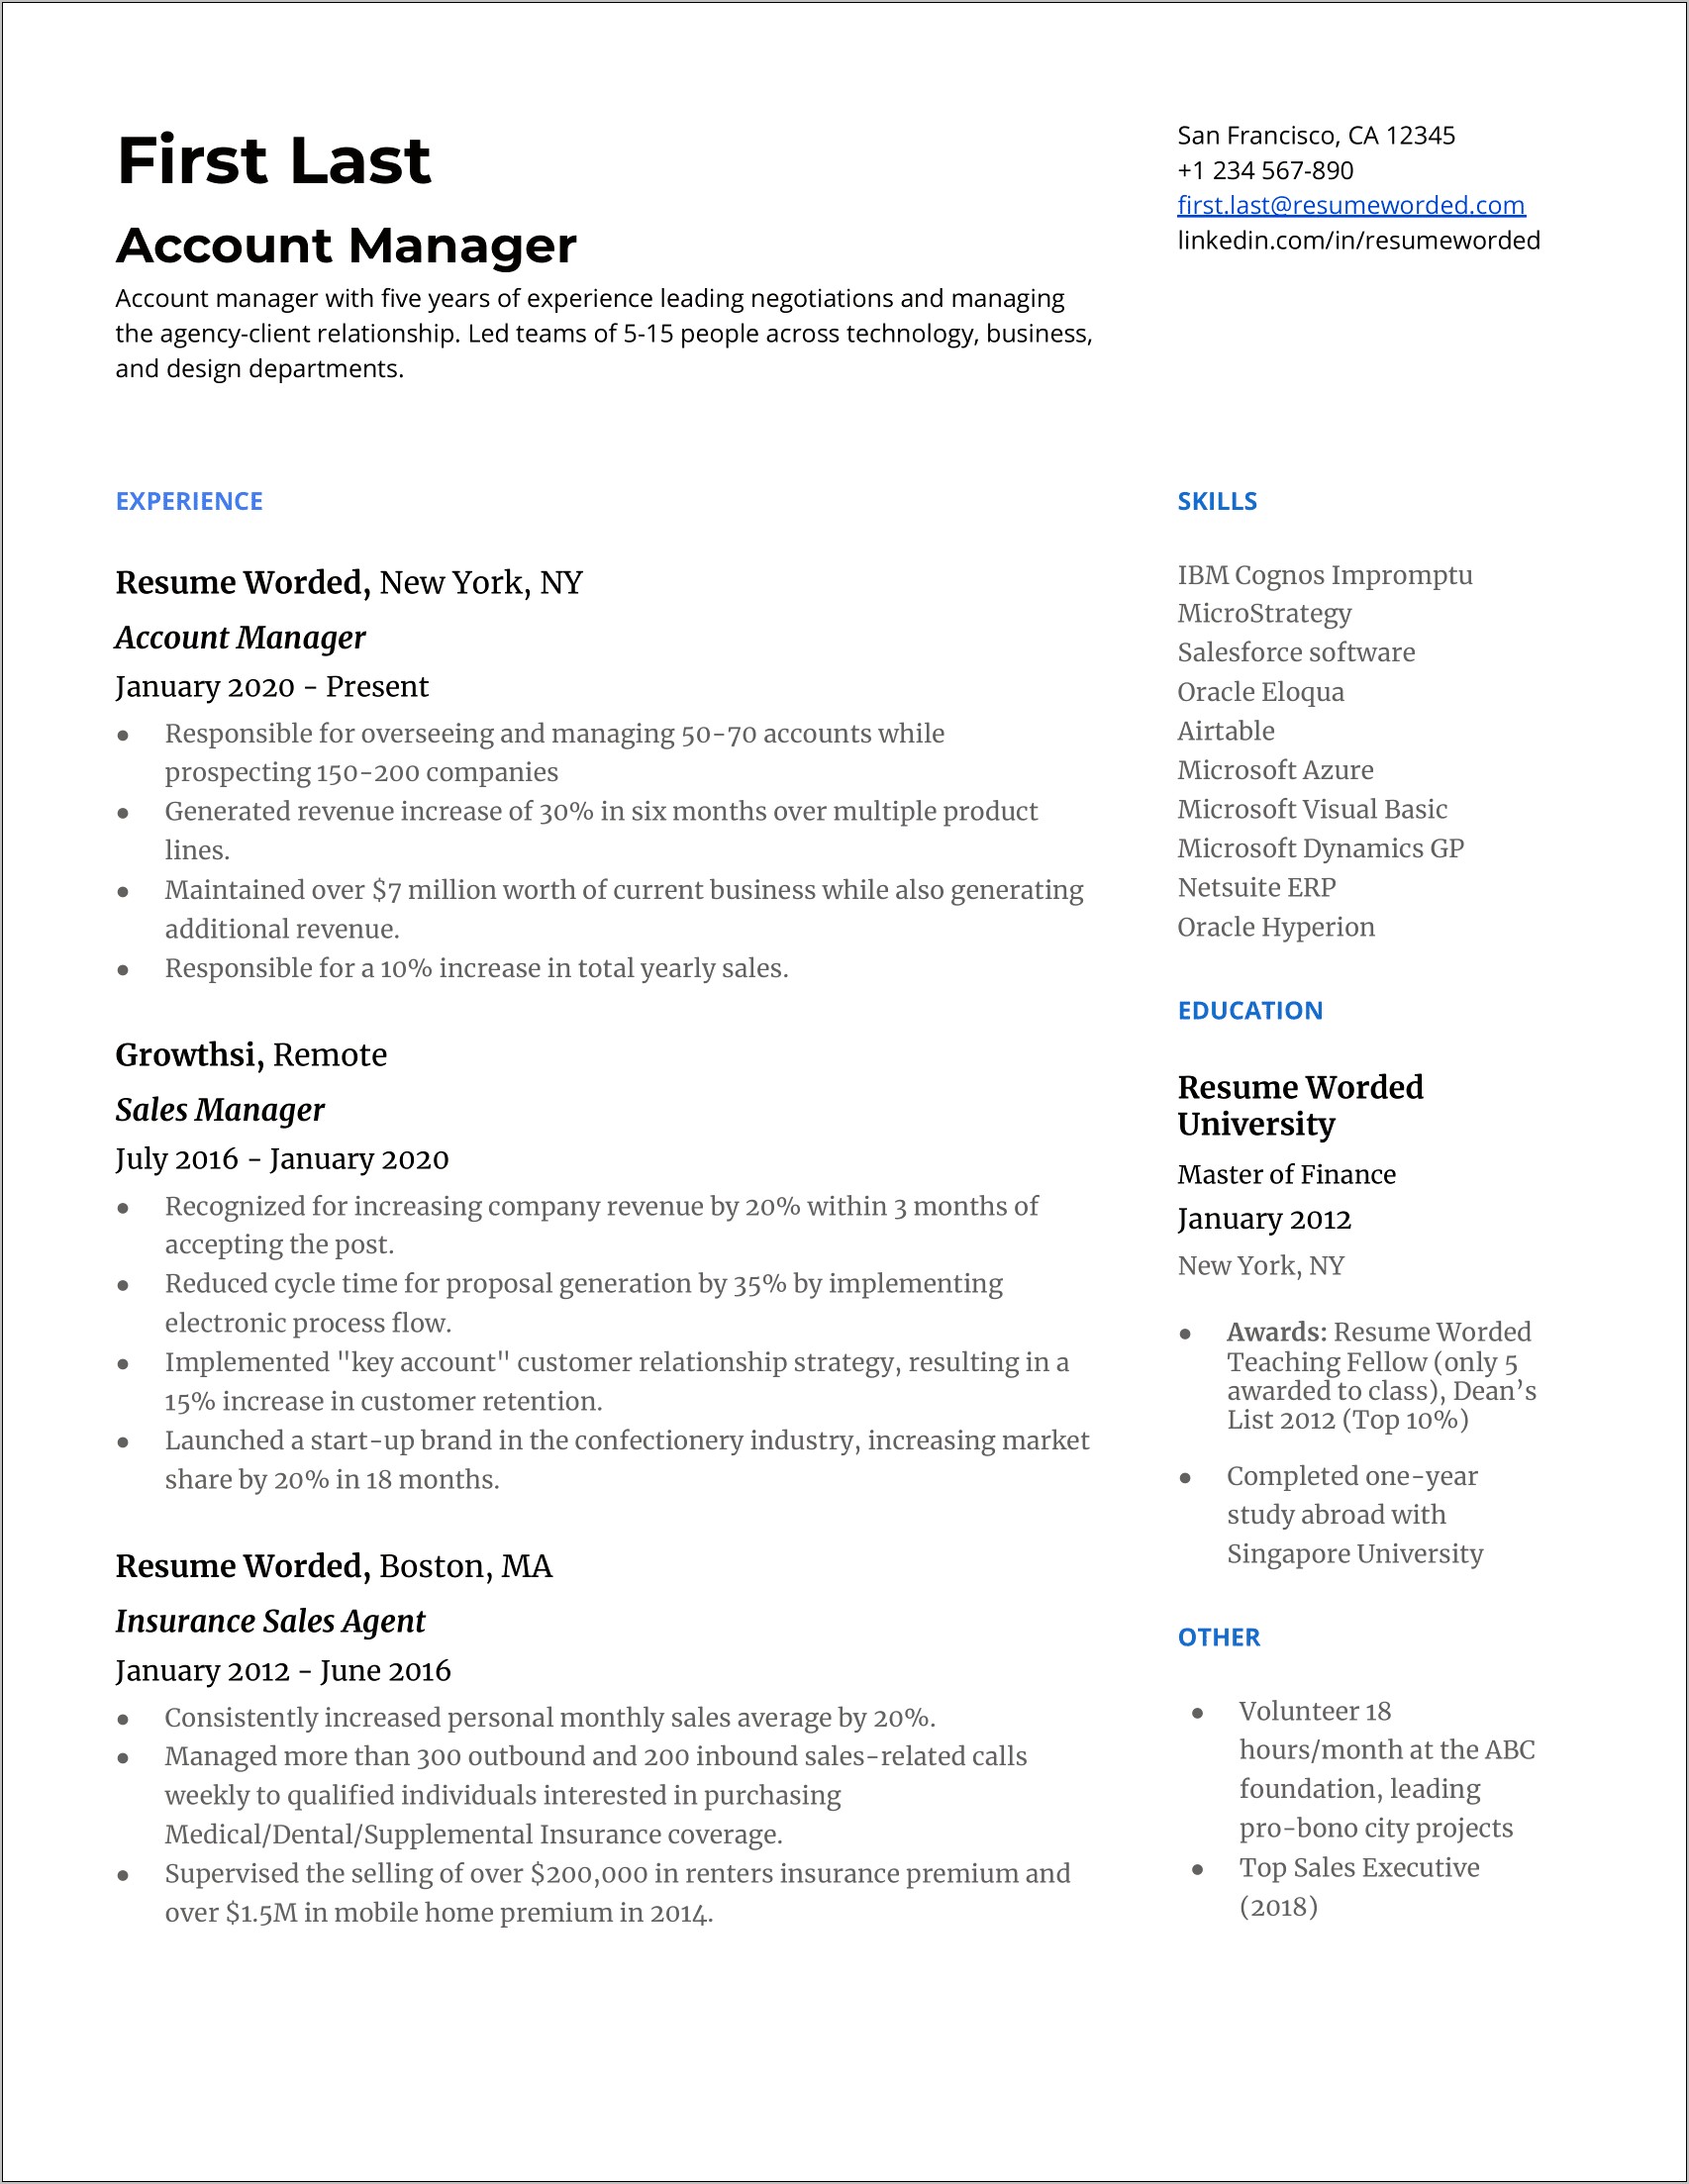 Resume Format For Sales Manager In Insurance